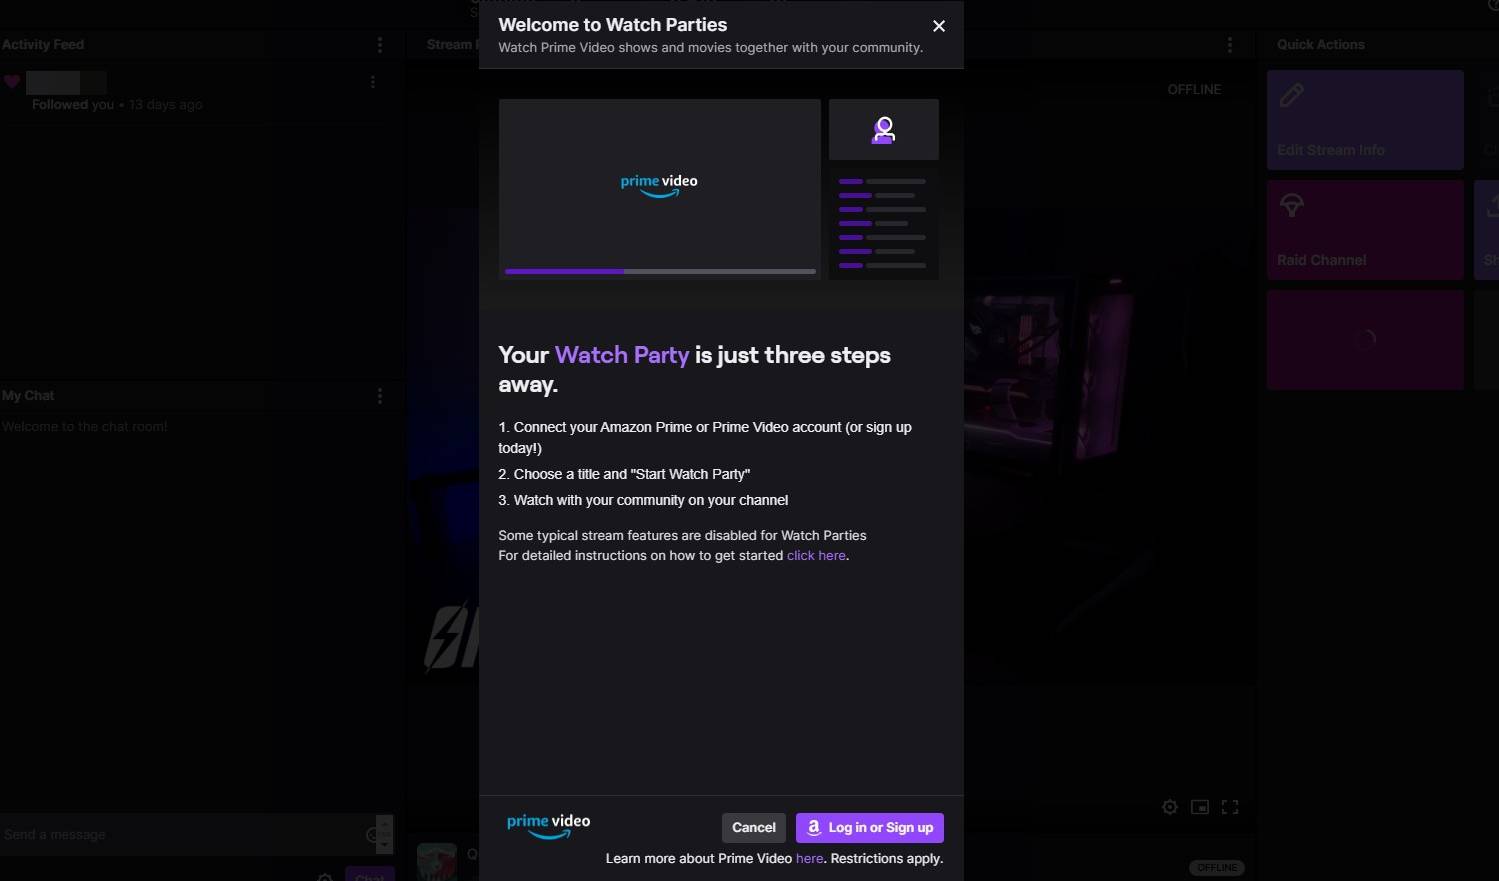 How To Host Twitch Watch Parties On Your Stream